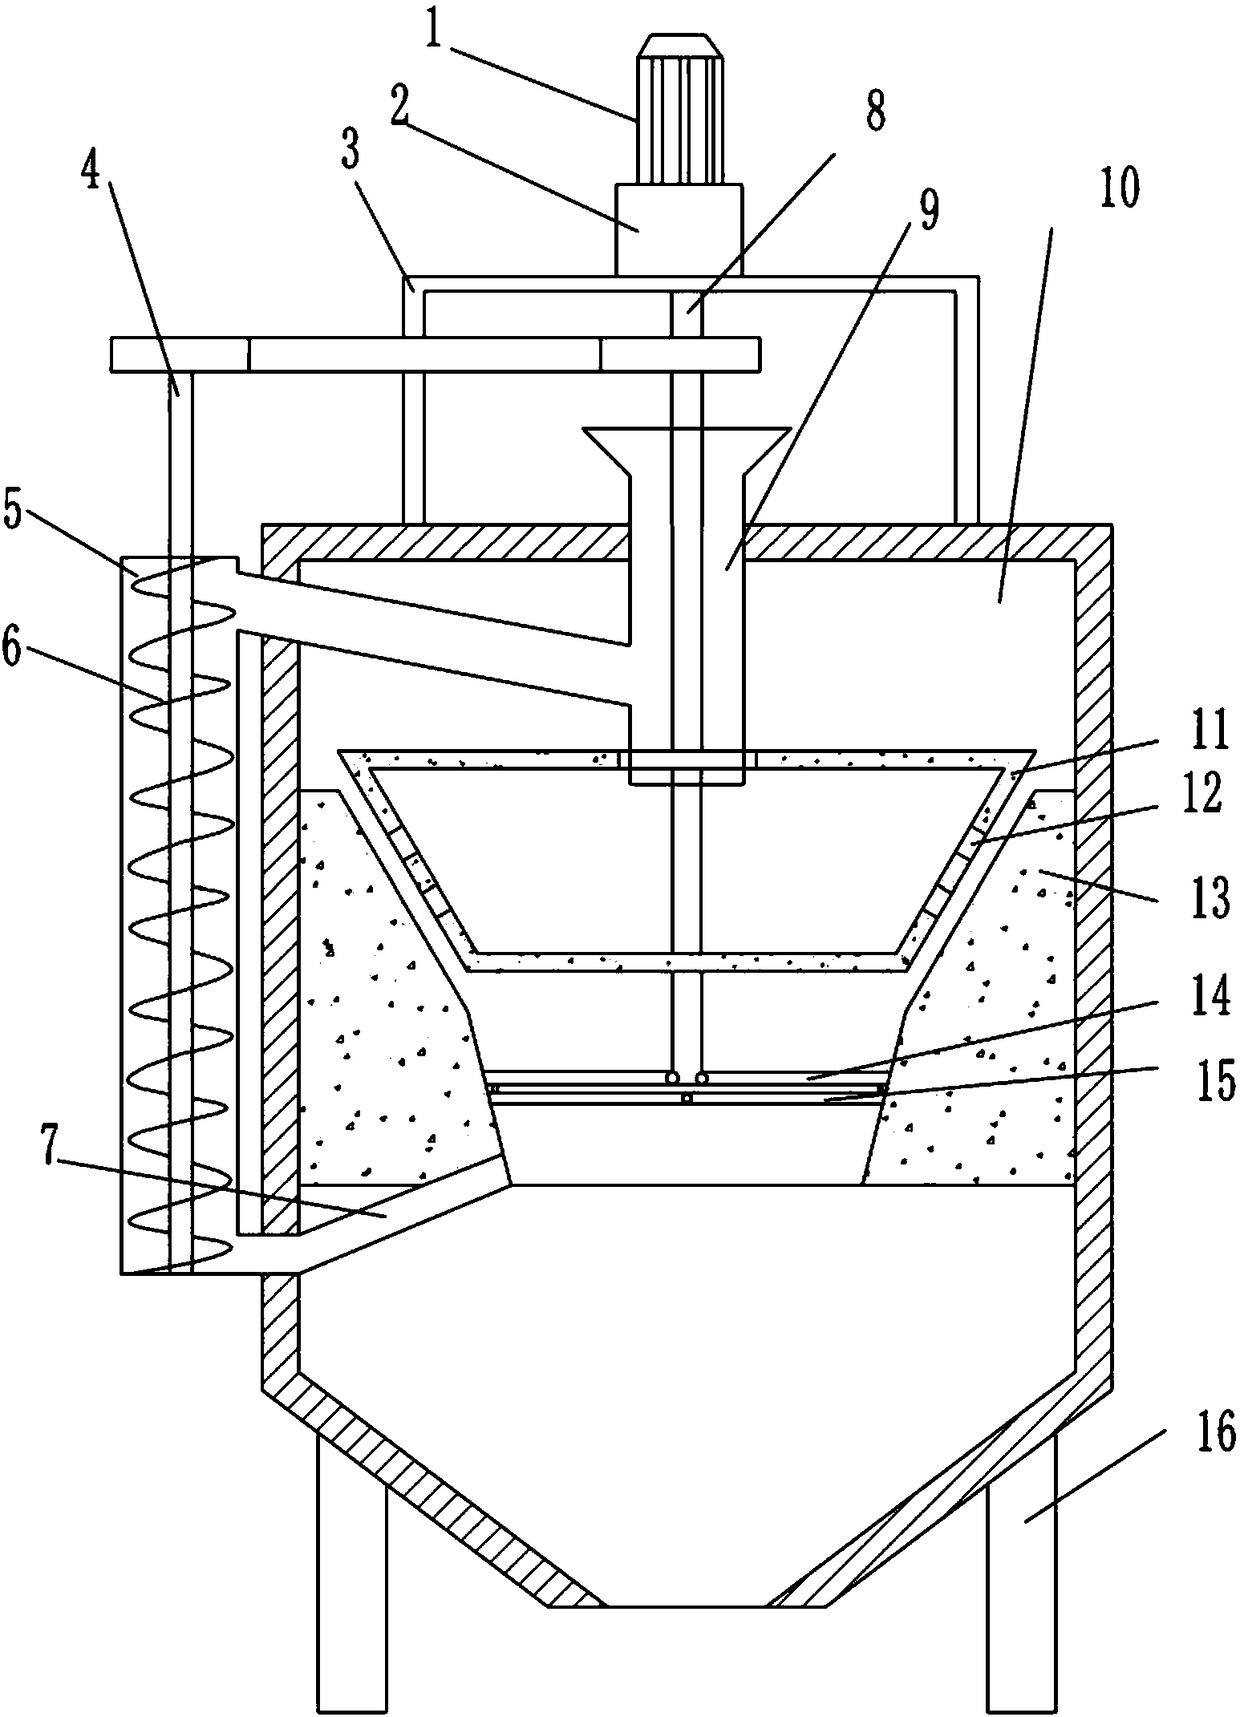 Powder grinding device for producing water-soluble coating